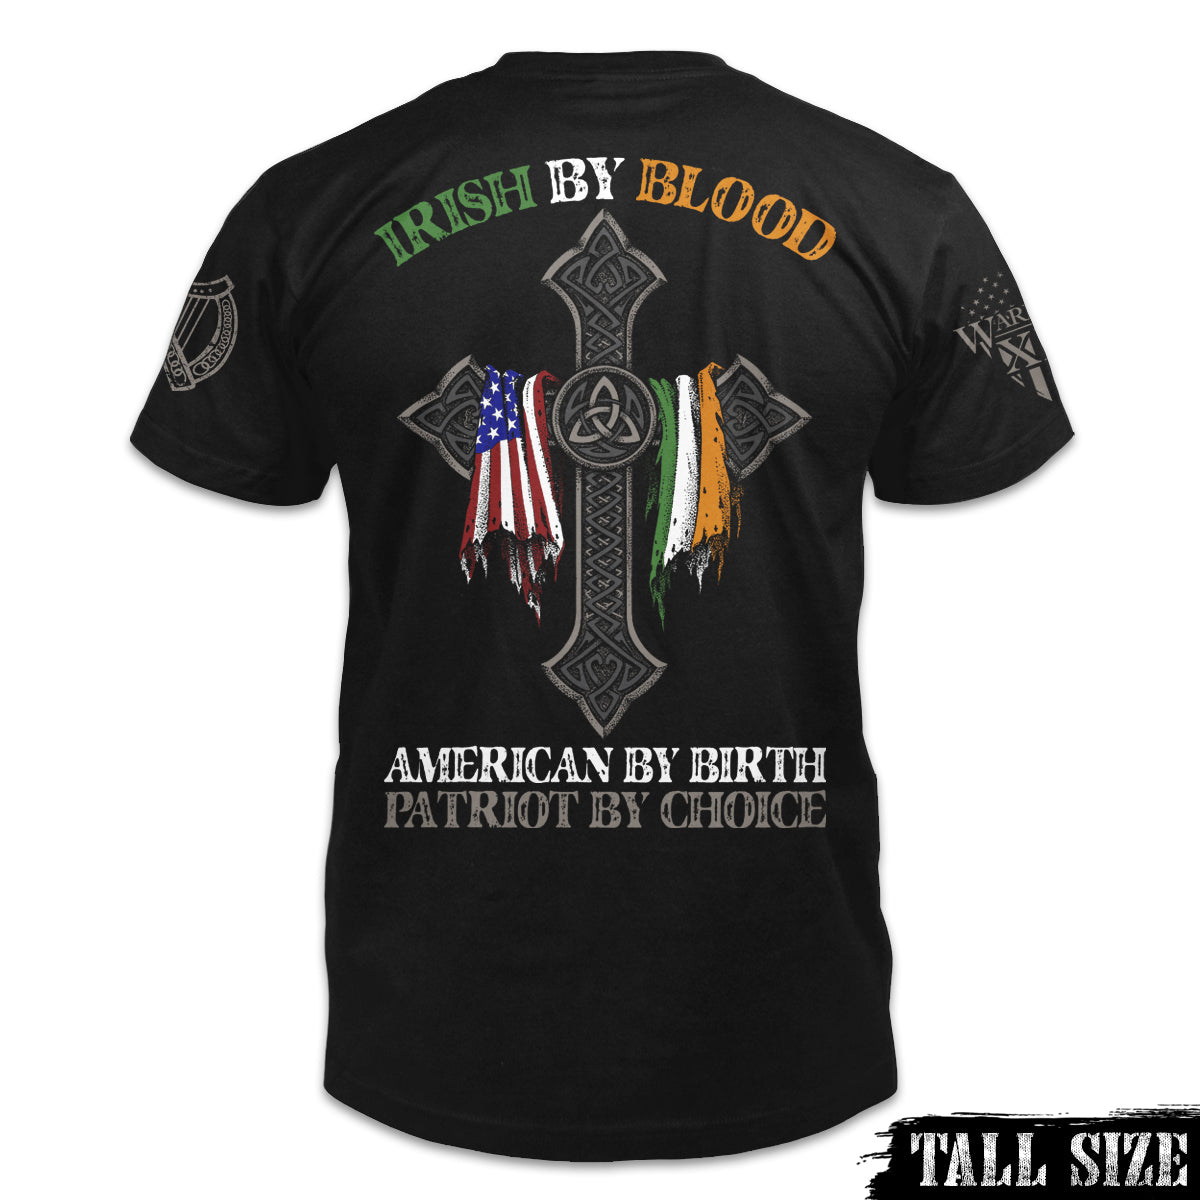 A black tall size shirt with the words "Irish by blood, American by birth, patriot by choice" with a cross holding an American and Irish flag printed on the back of the shirt.